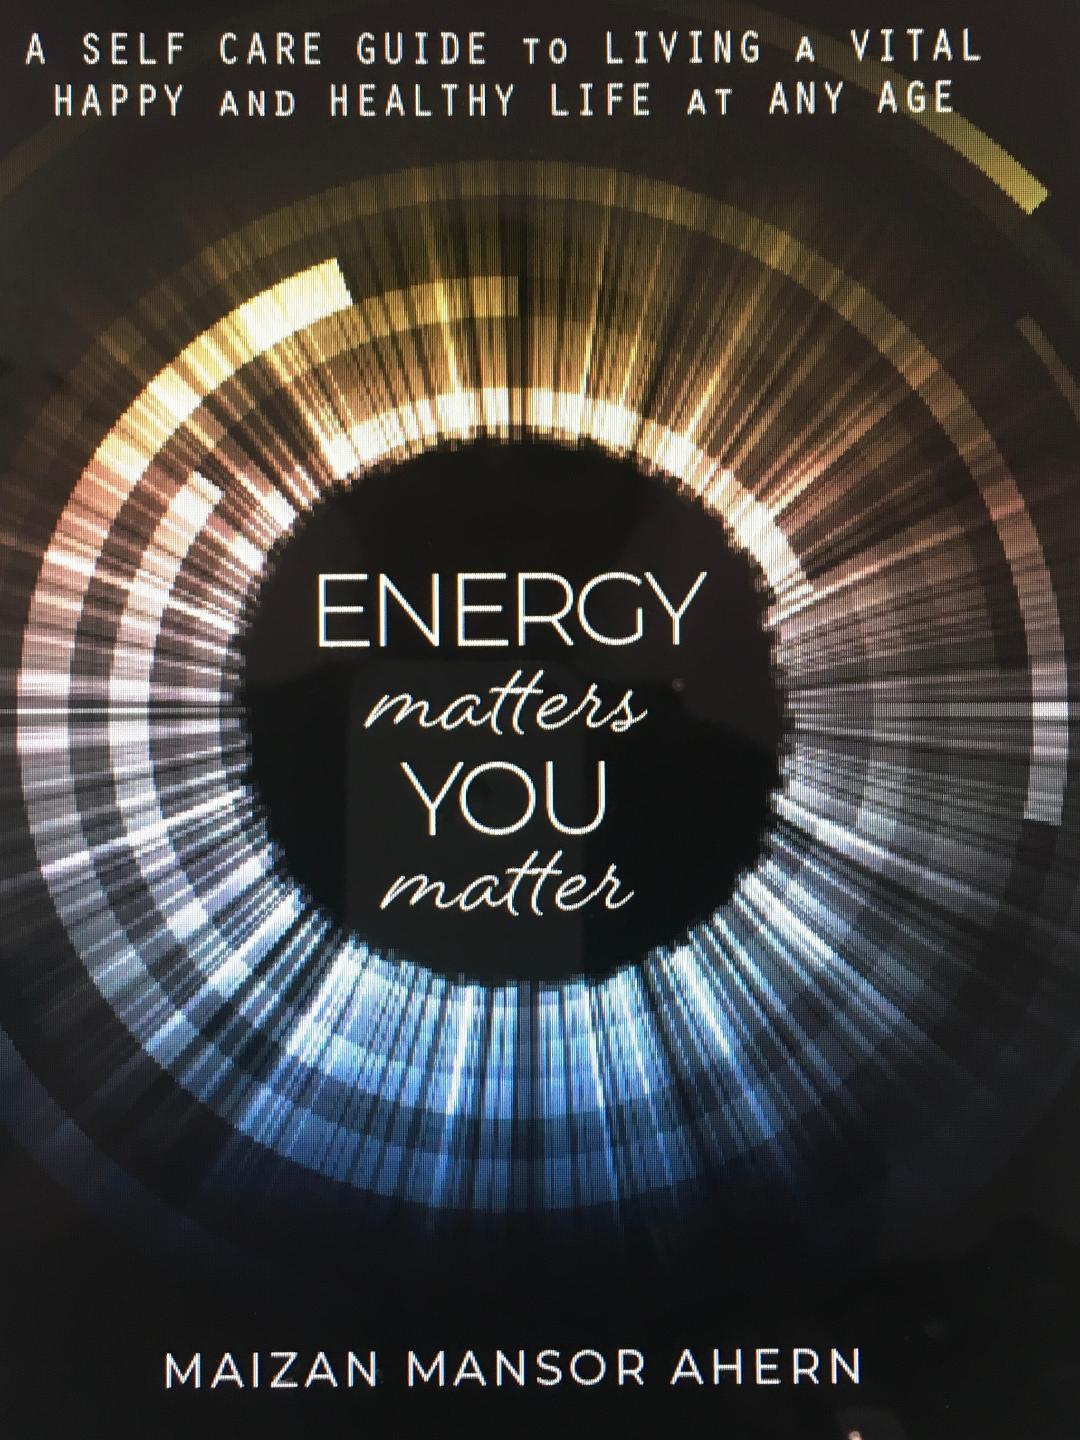 NEW! Book Preorder "ENERGY matters, YOU matter"